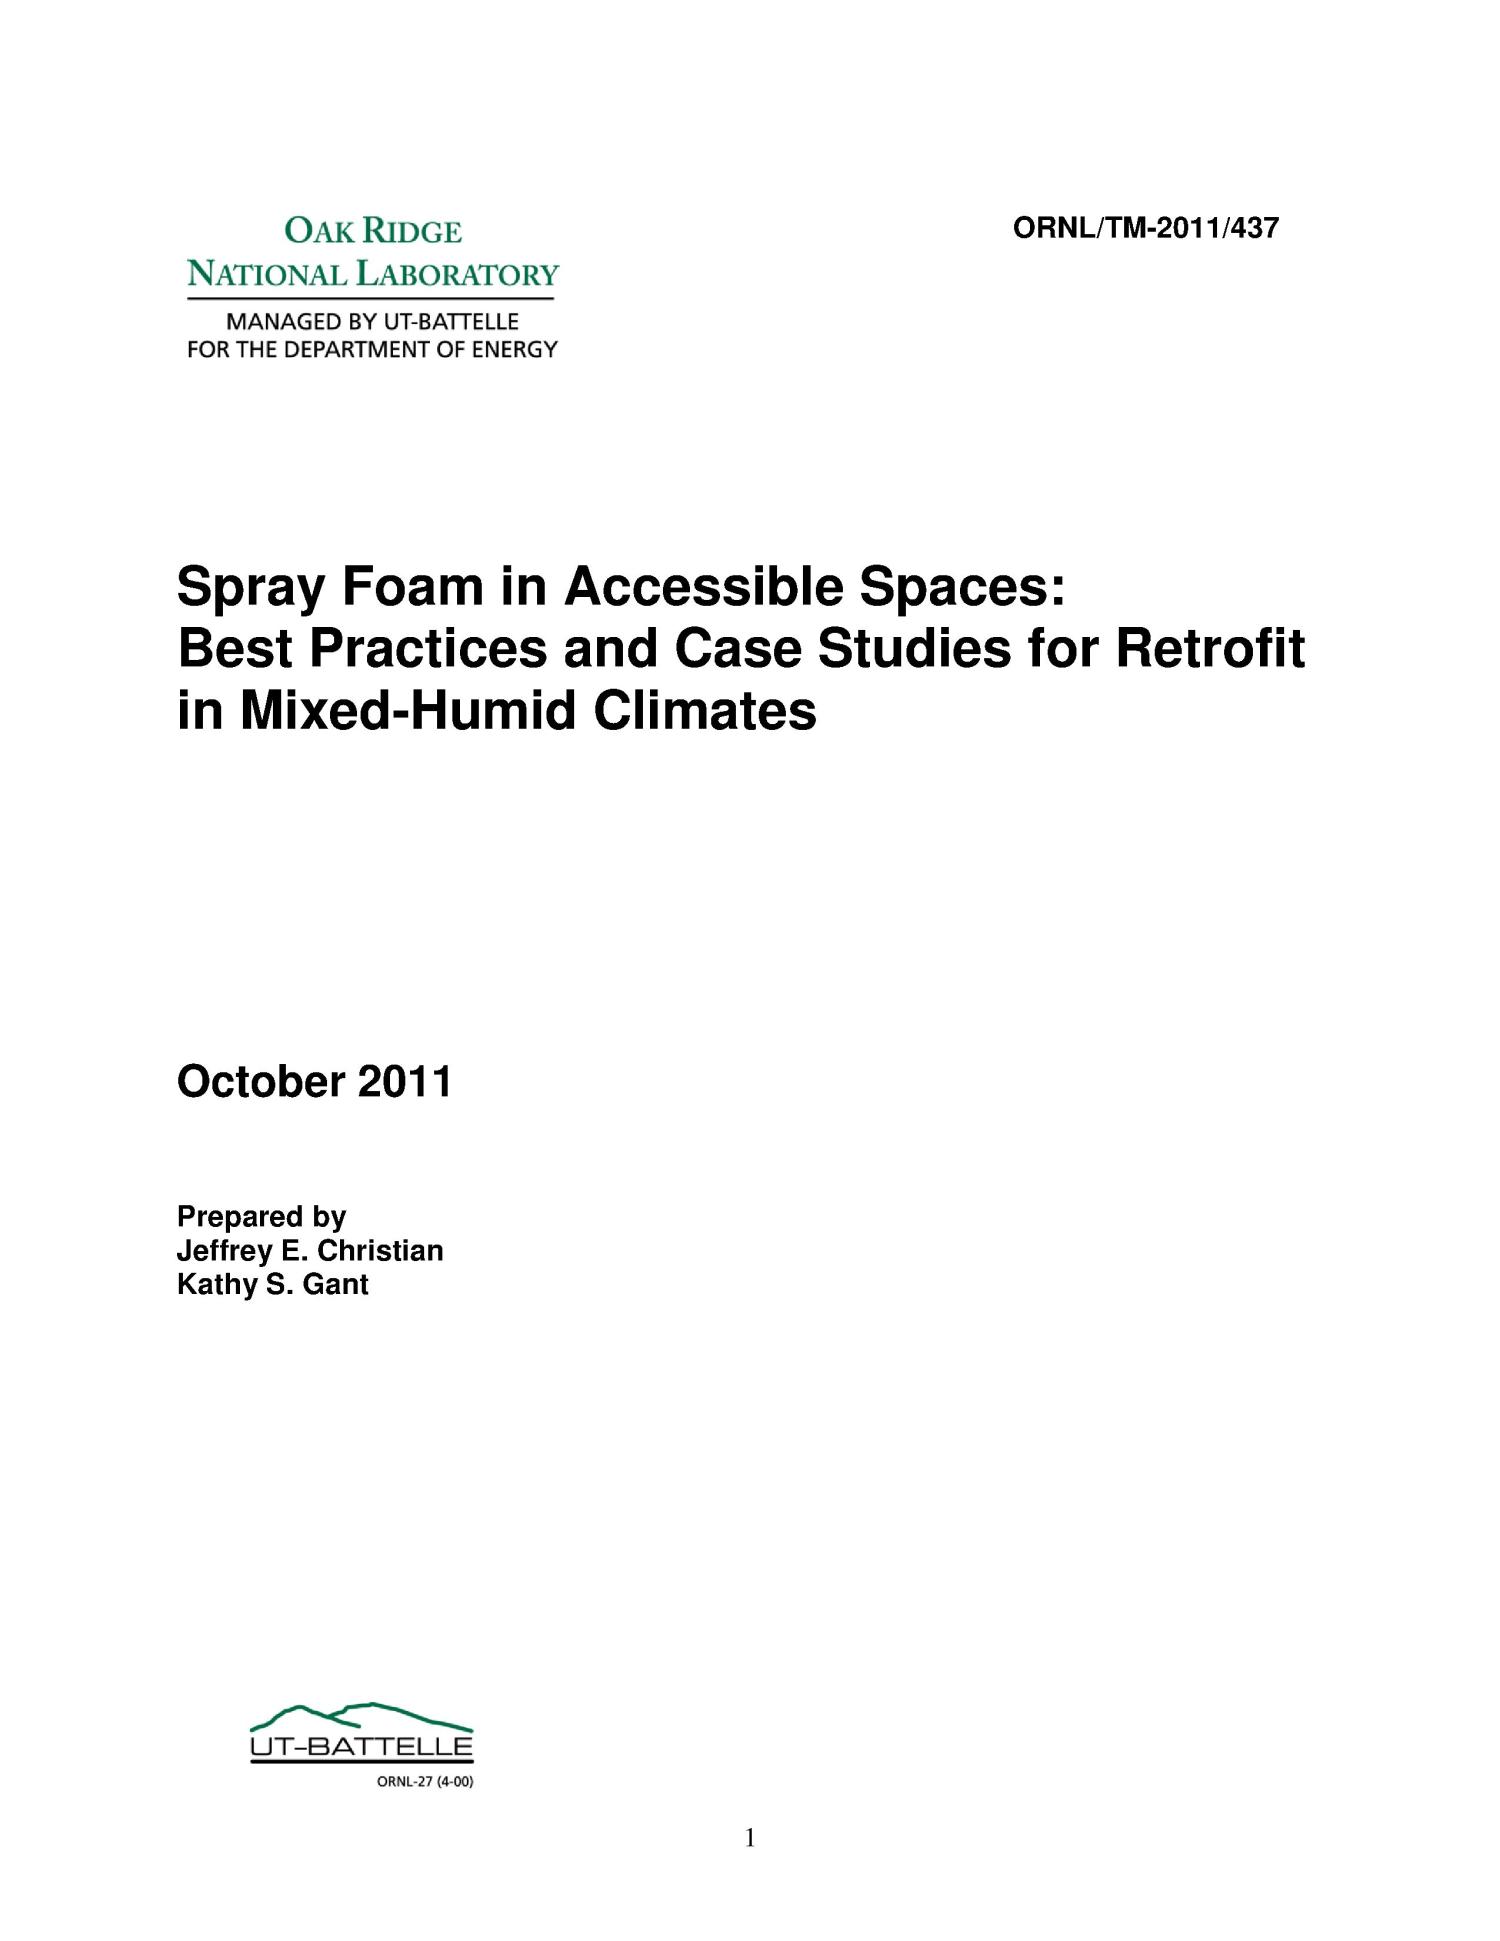 SPRAY FOAM IN ACCESSIBLE SPACES:BEST PRACTICES AND CASE STUDIES FOR RETROFIT IN MIXED-HUMID CLIMATE
                                                
                                                    [Sequence #]: 1 of 56
                                                